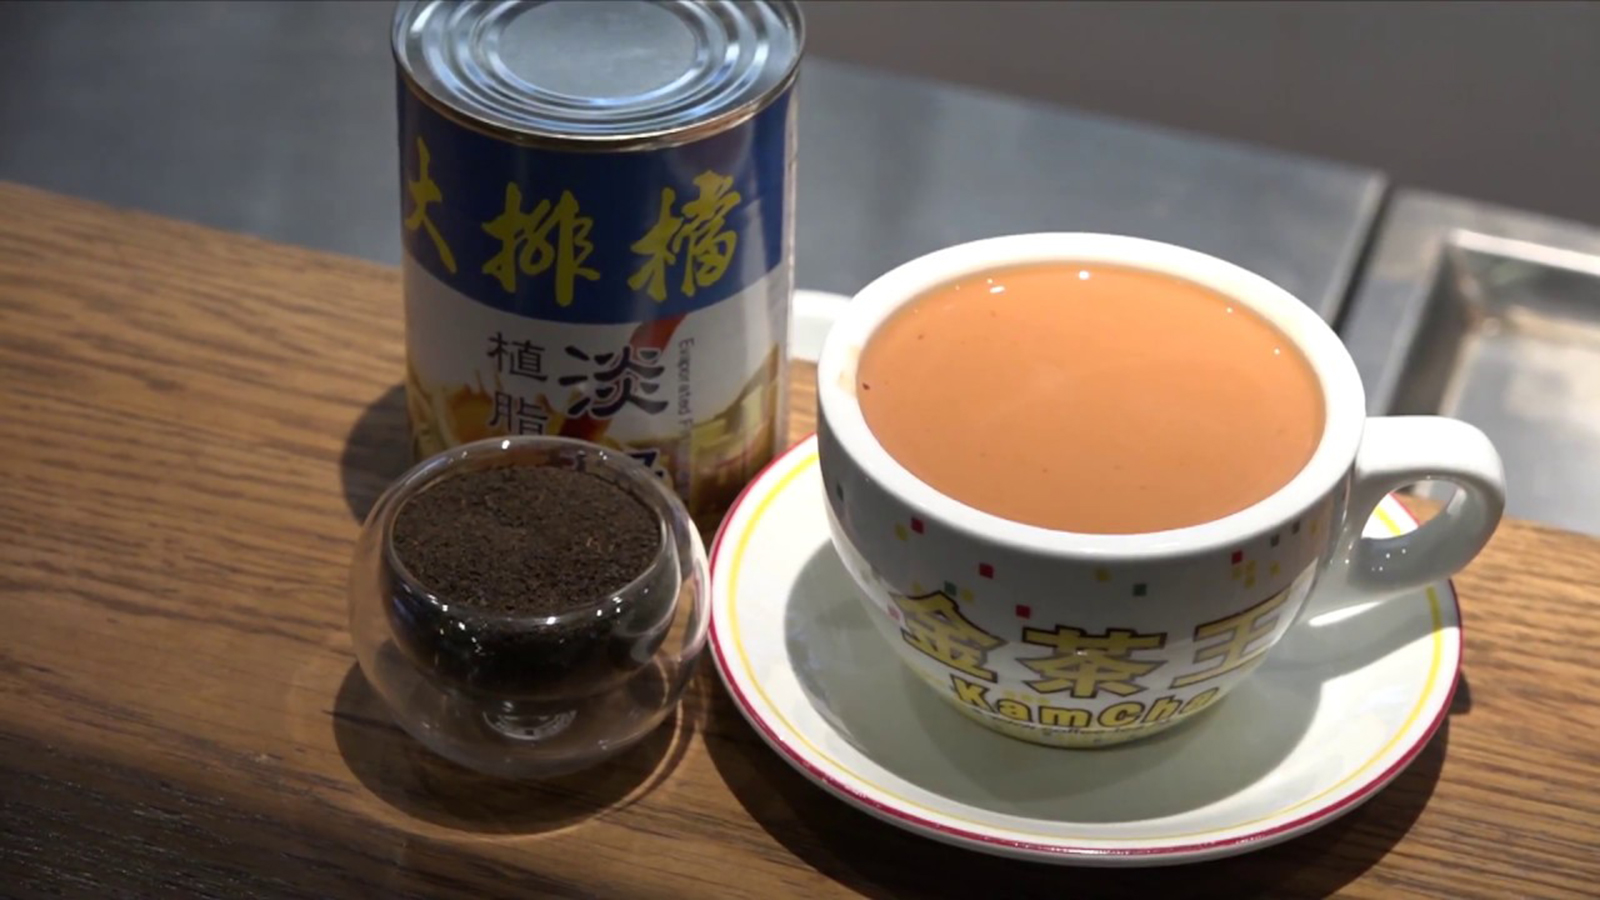 Evaporated milk is the key difference of Hong Kong-style milk tea.